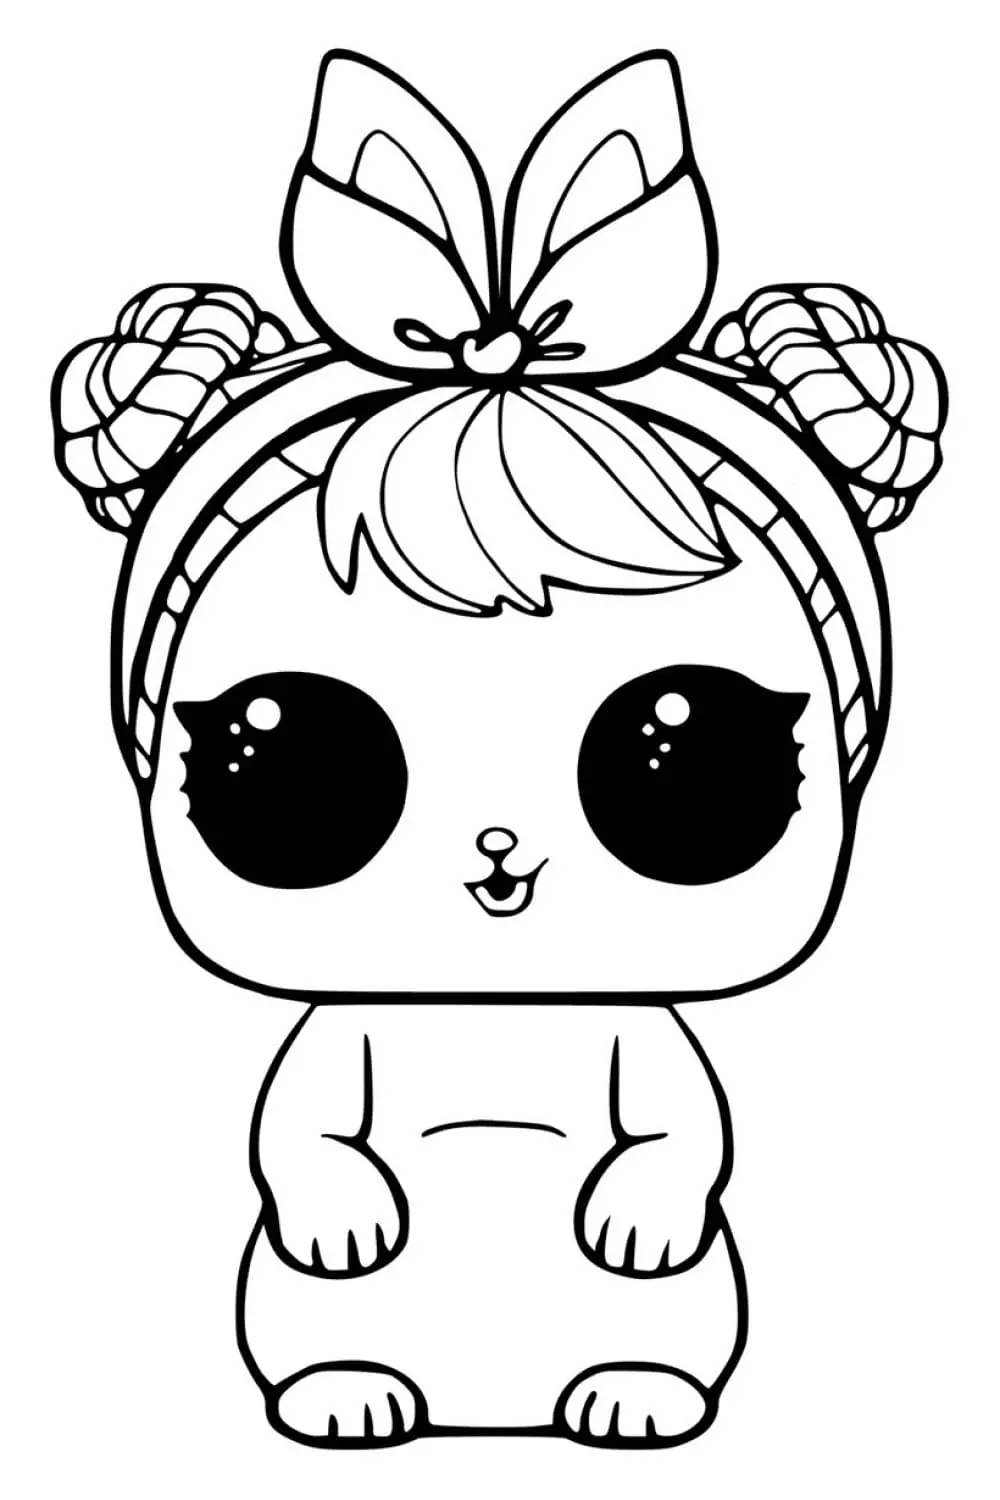 LOL Decoder Pet Bunny Coloring Page - Free Printable Coloring Pages for ...